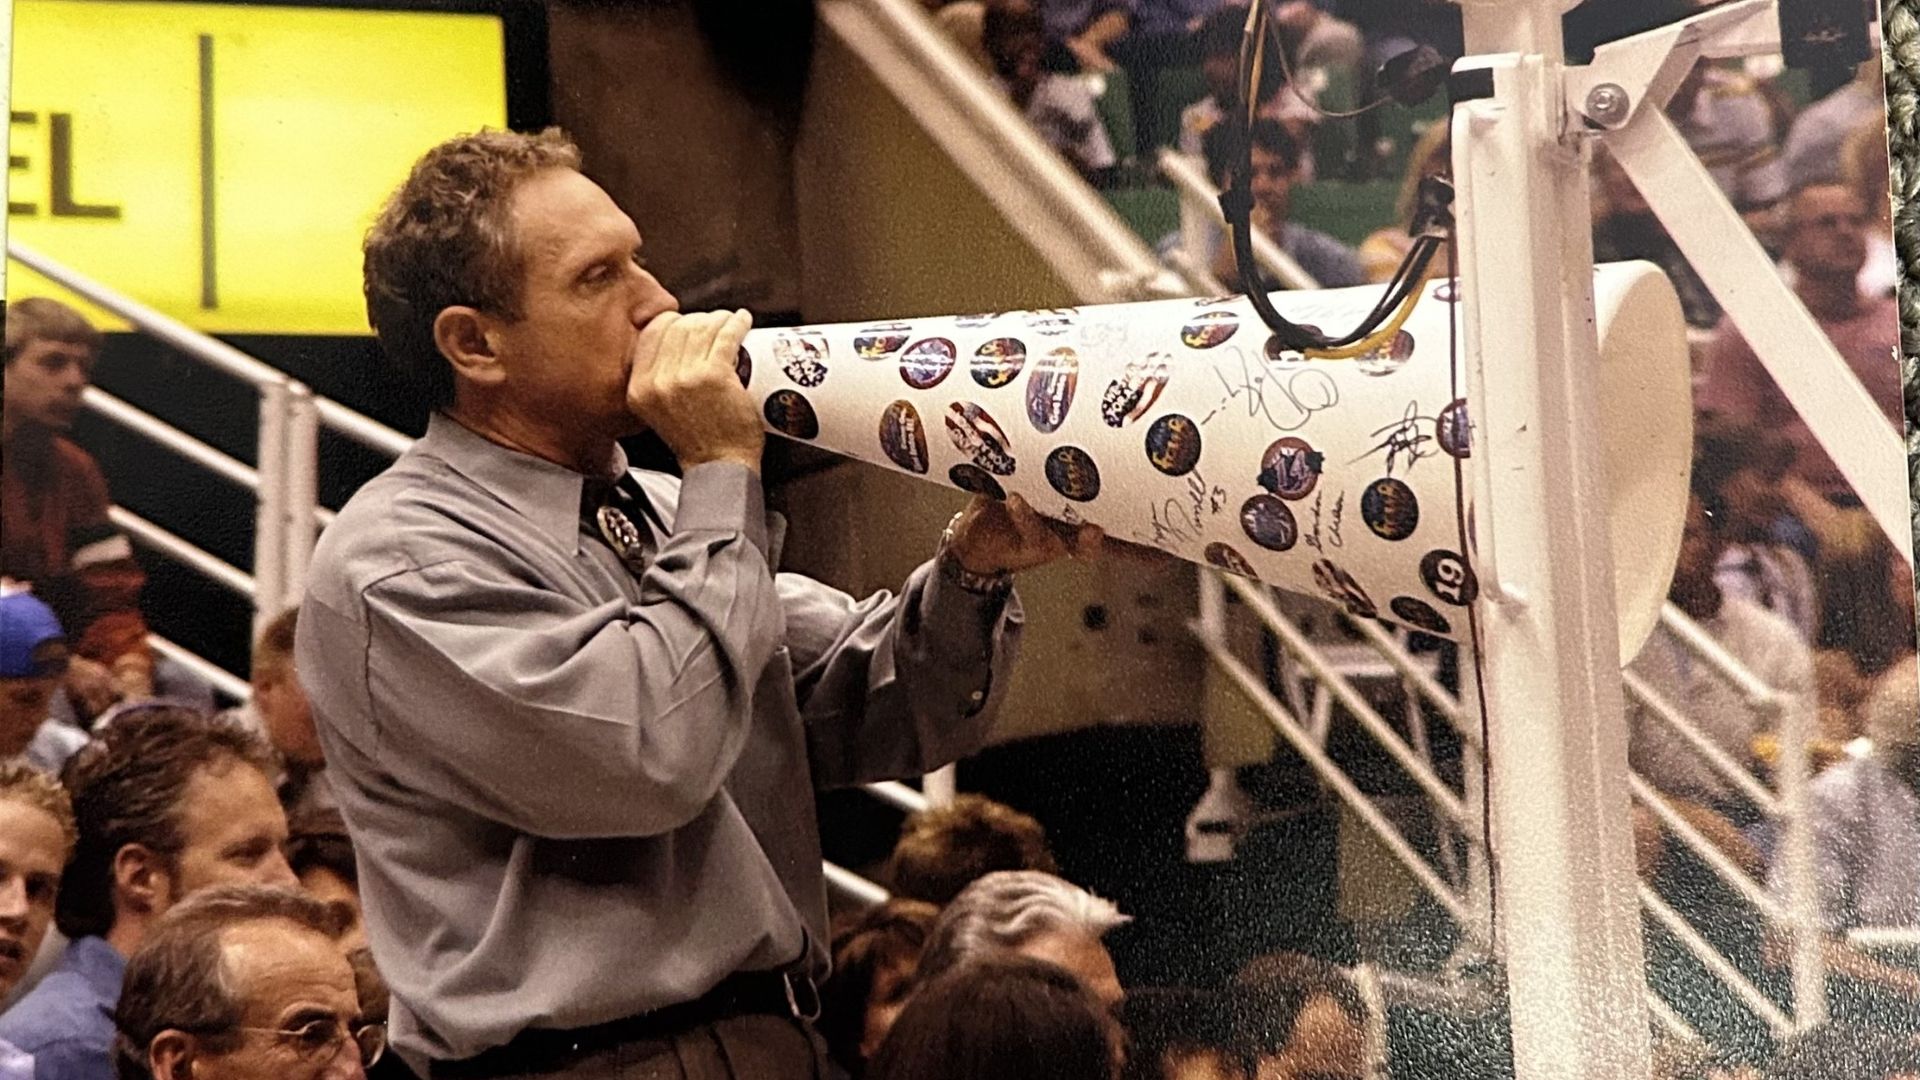 A man speaks into a bullhorn at a basketball game.